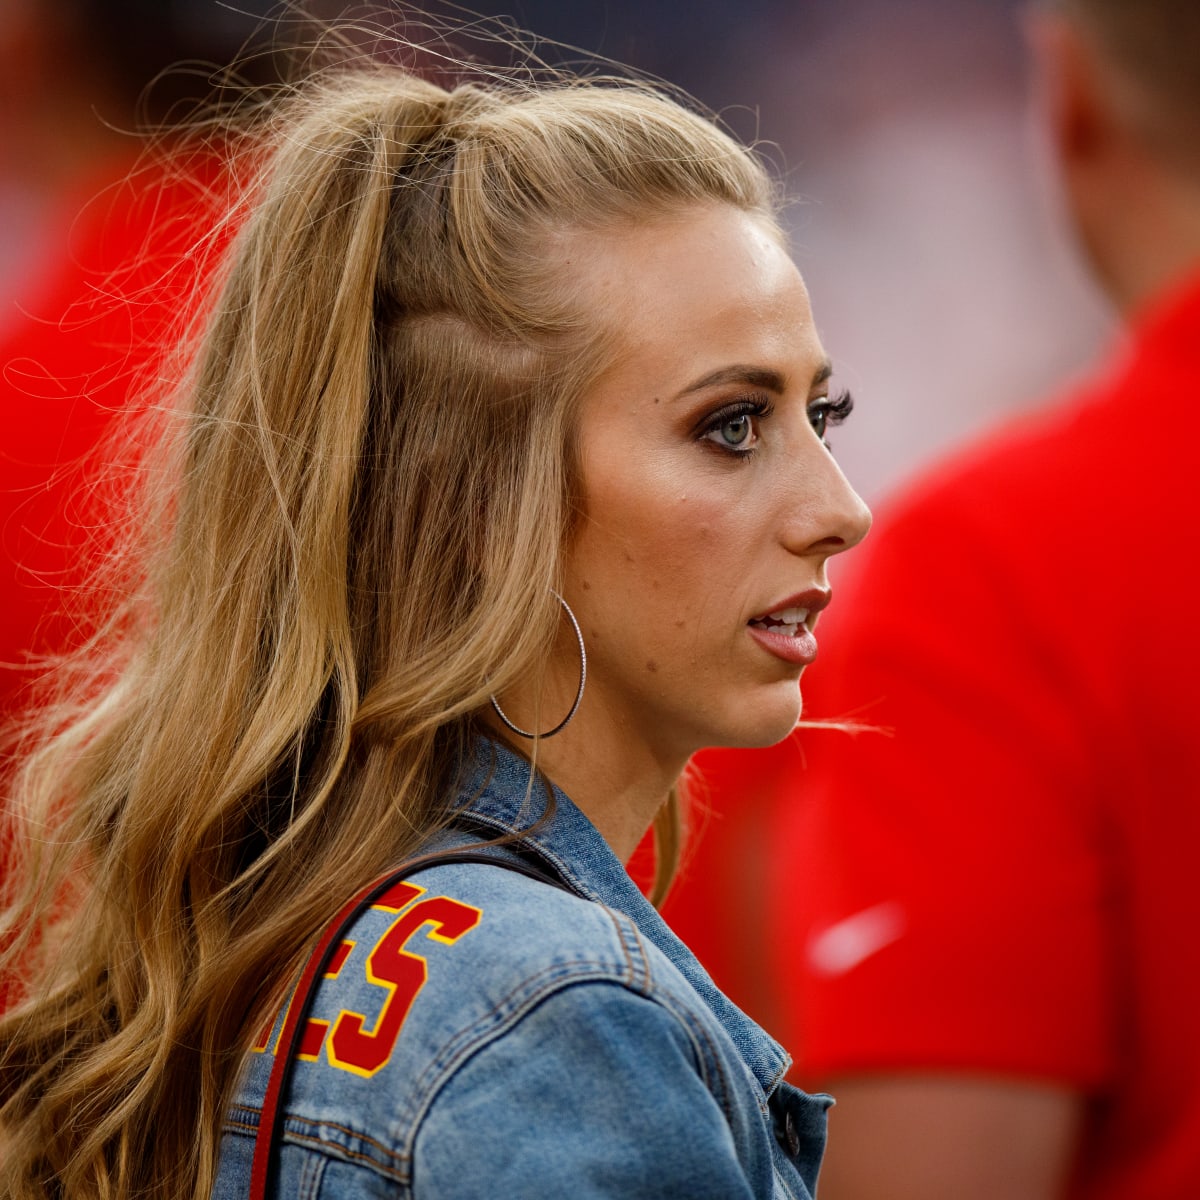 Brittany Mahomes sizzles in revealing top for night out as fans are  'obsessed' with wife of NFL star Patrick